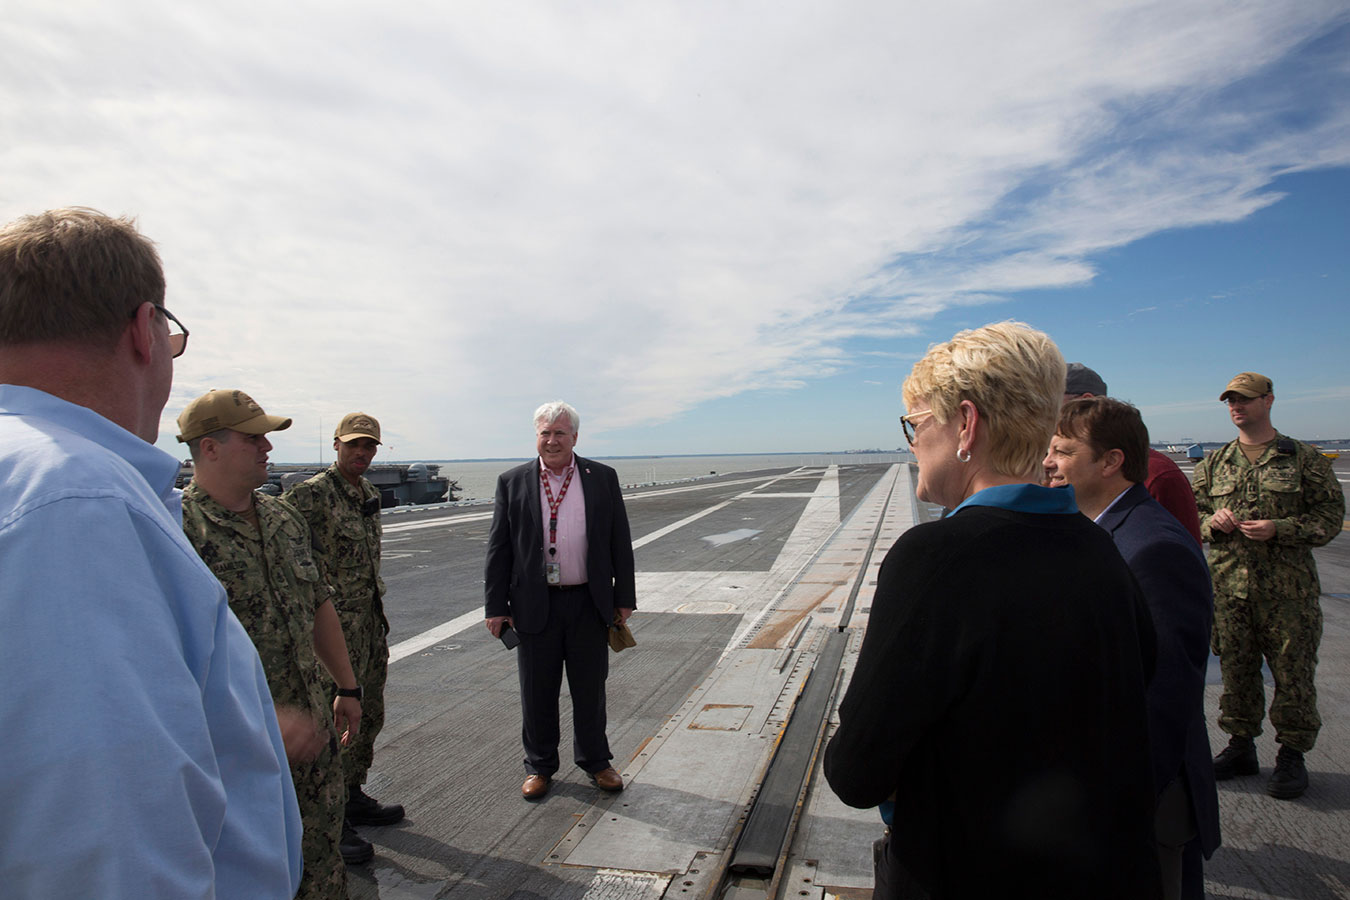 Chief Privacy Officer and Commissioner on Flight Deck